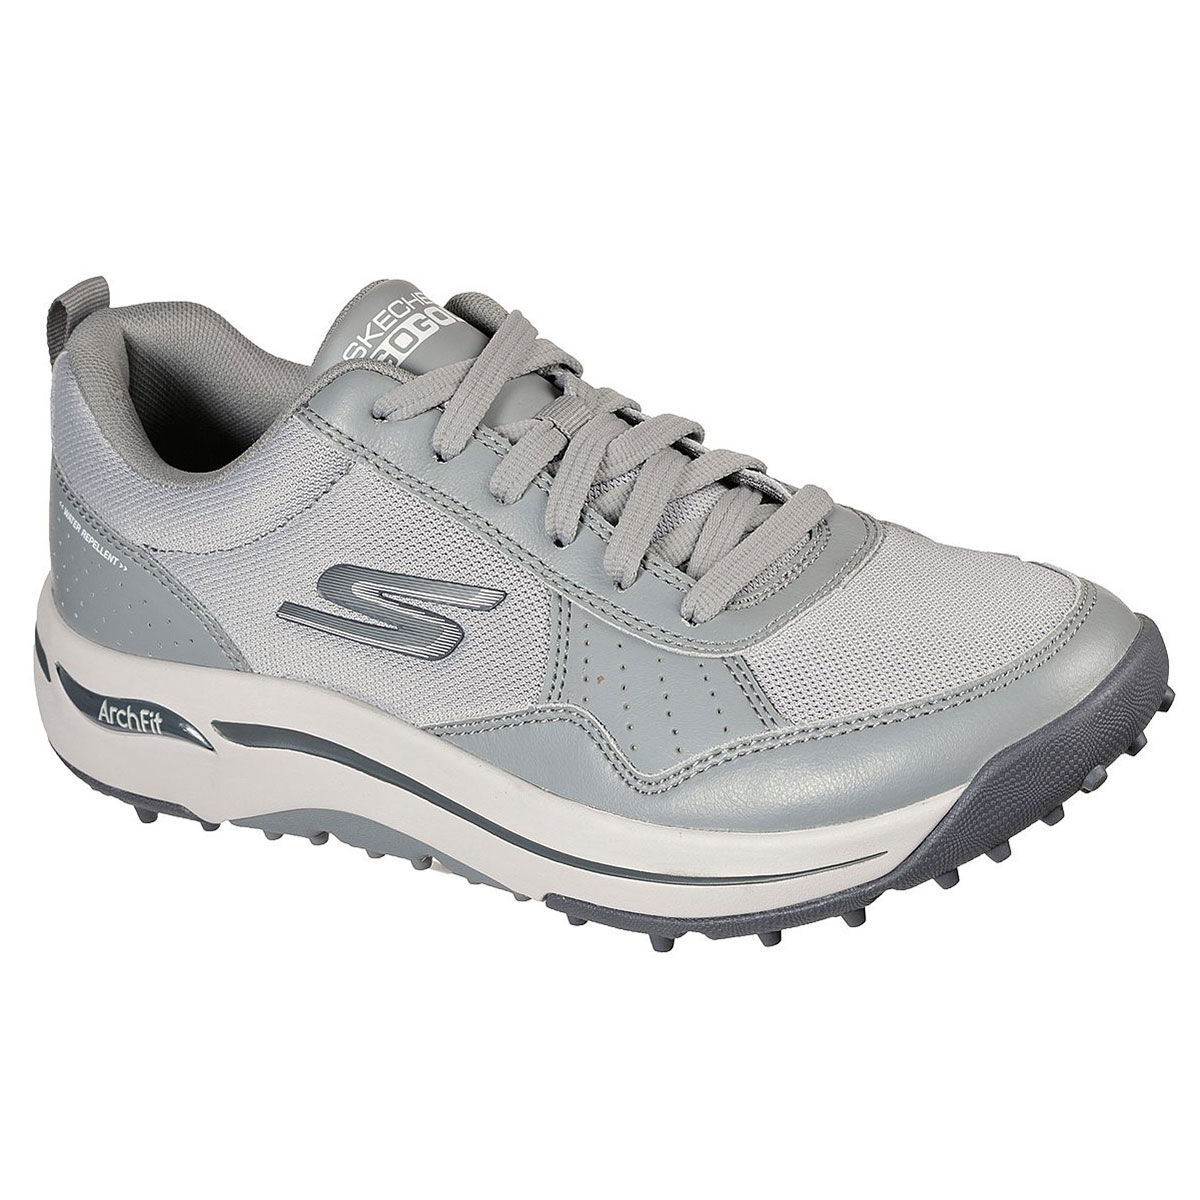 skechers arch fit golf shoes size 14